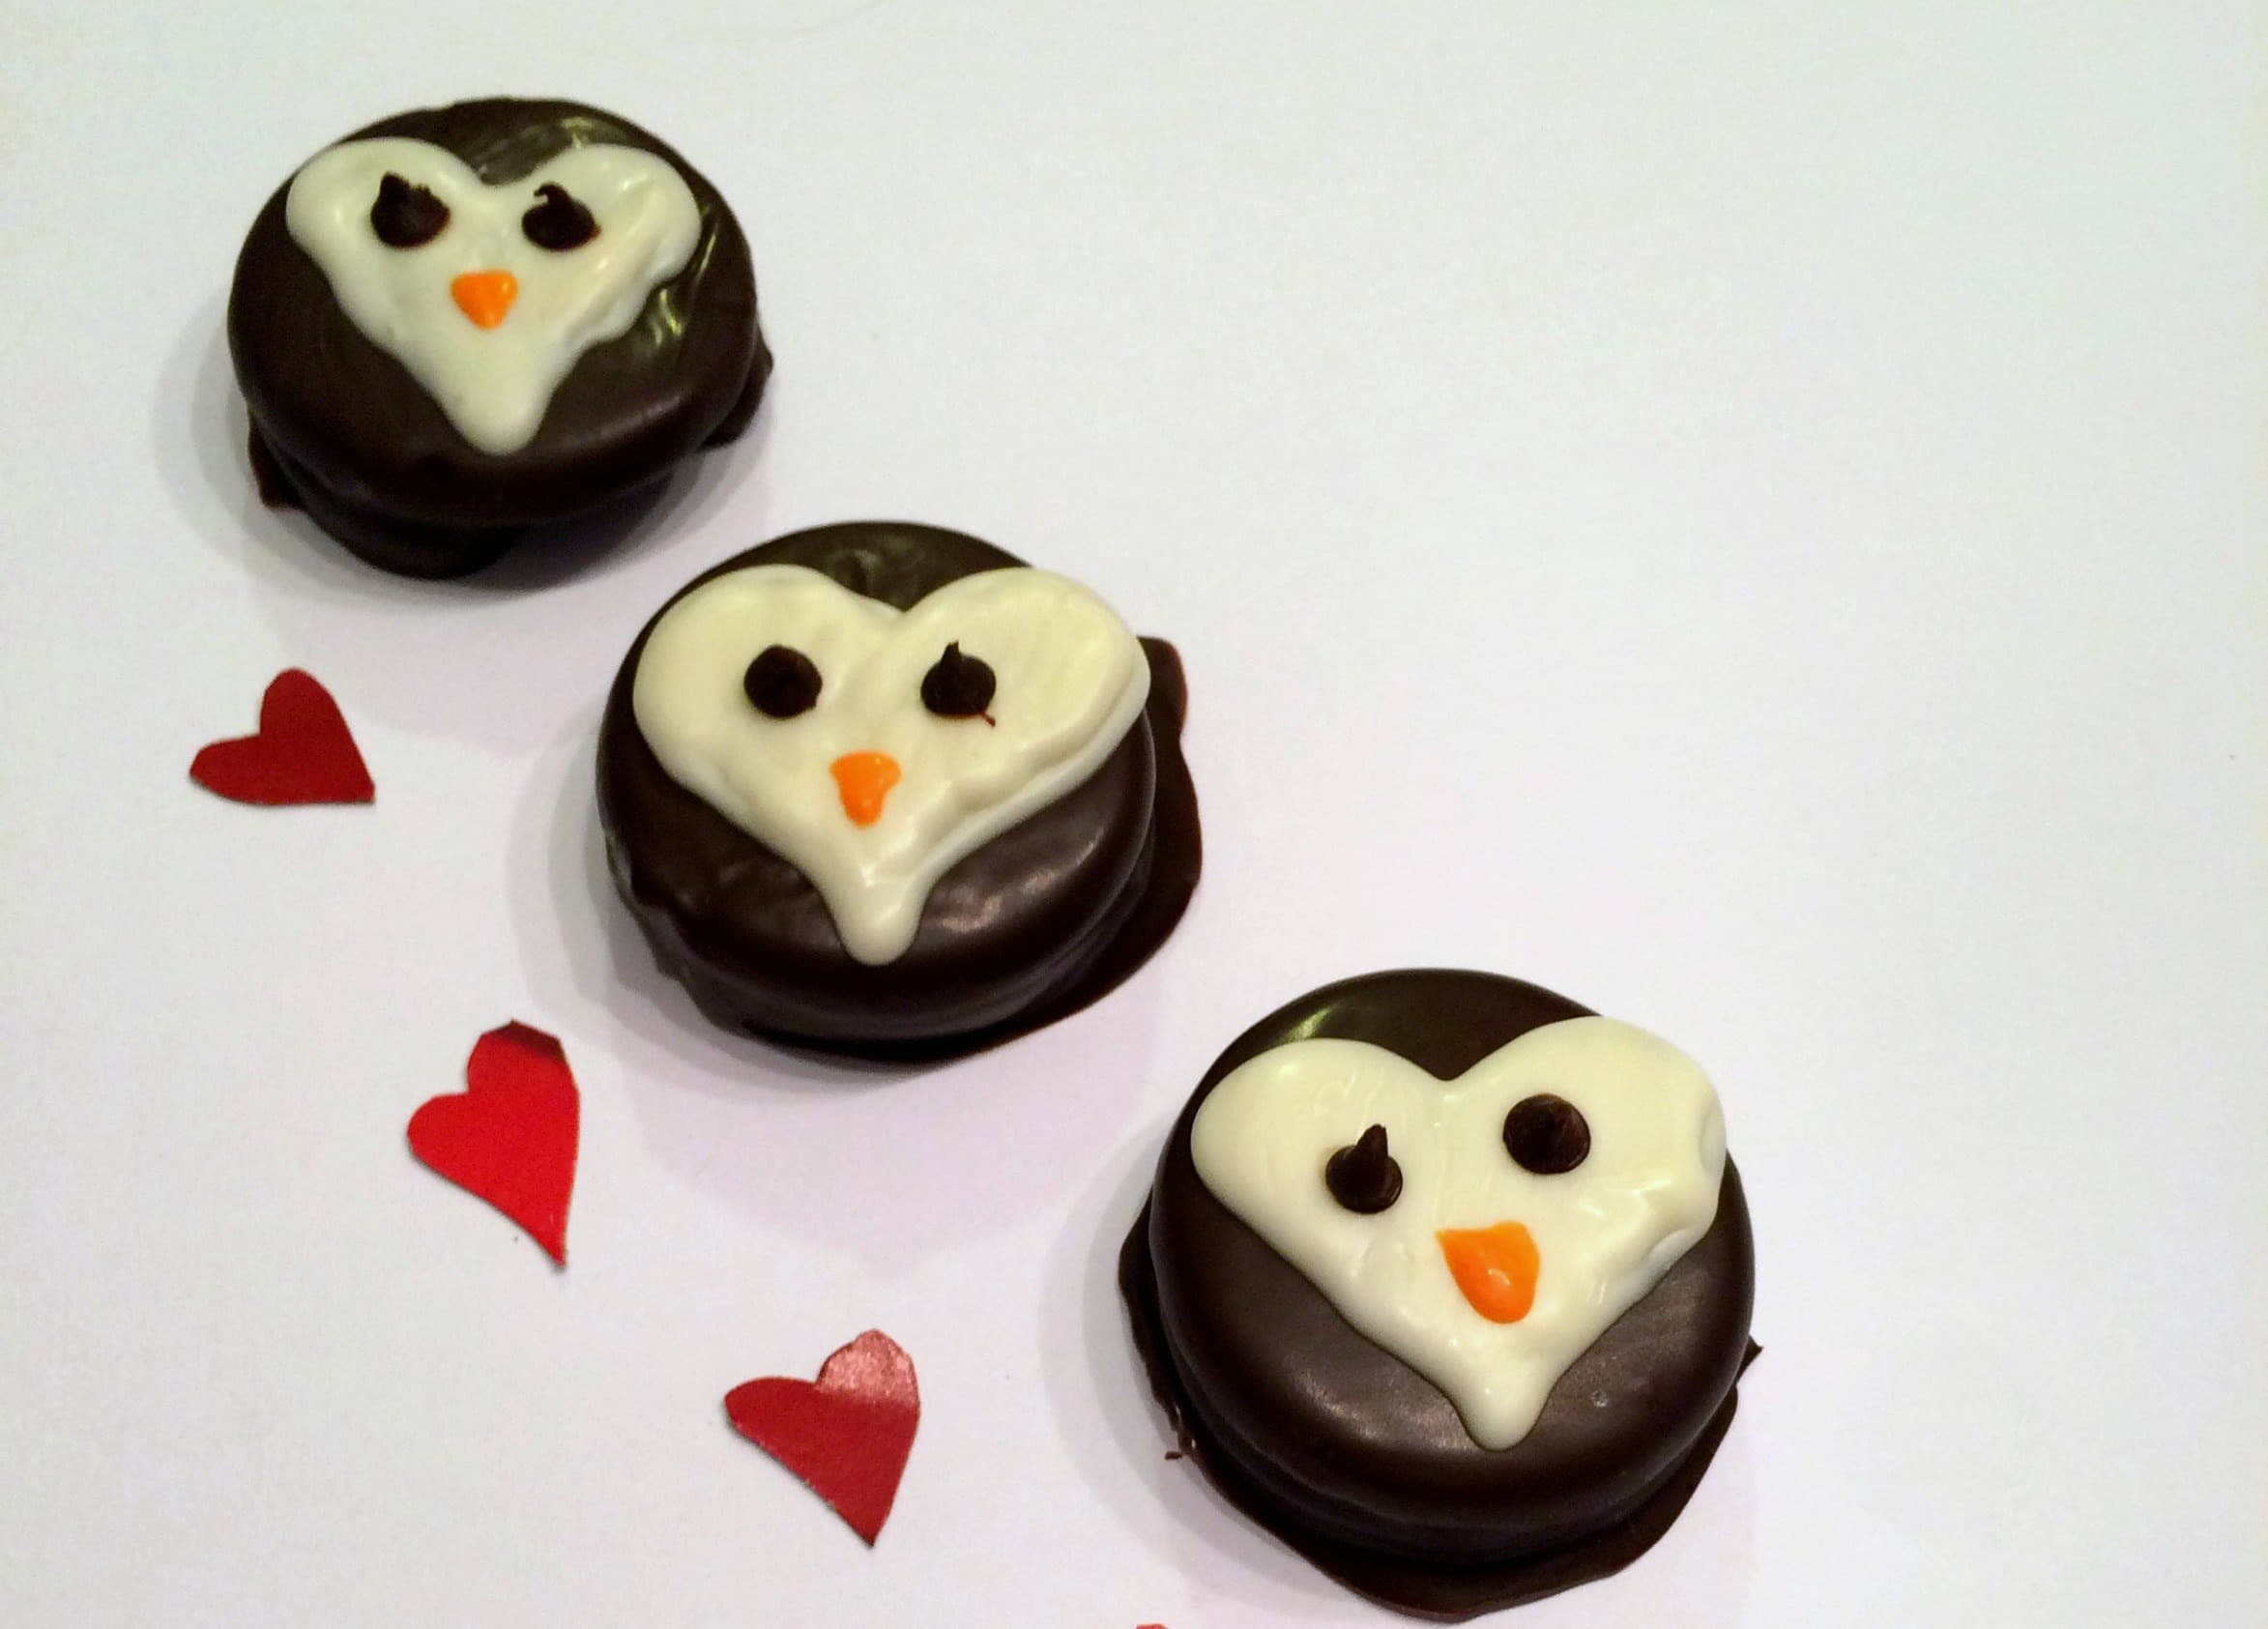 Whether you have a penguin lover in your life, or simply if you're looking for something non-pink or red this Valentine's Day, these penguin heart cookies are so cute! And while they are a little time consuming (covering the Oreos in chocolate), they aren't hard at all!